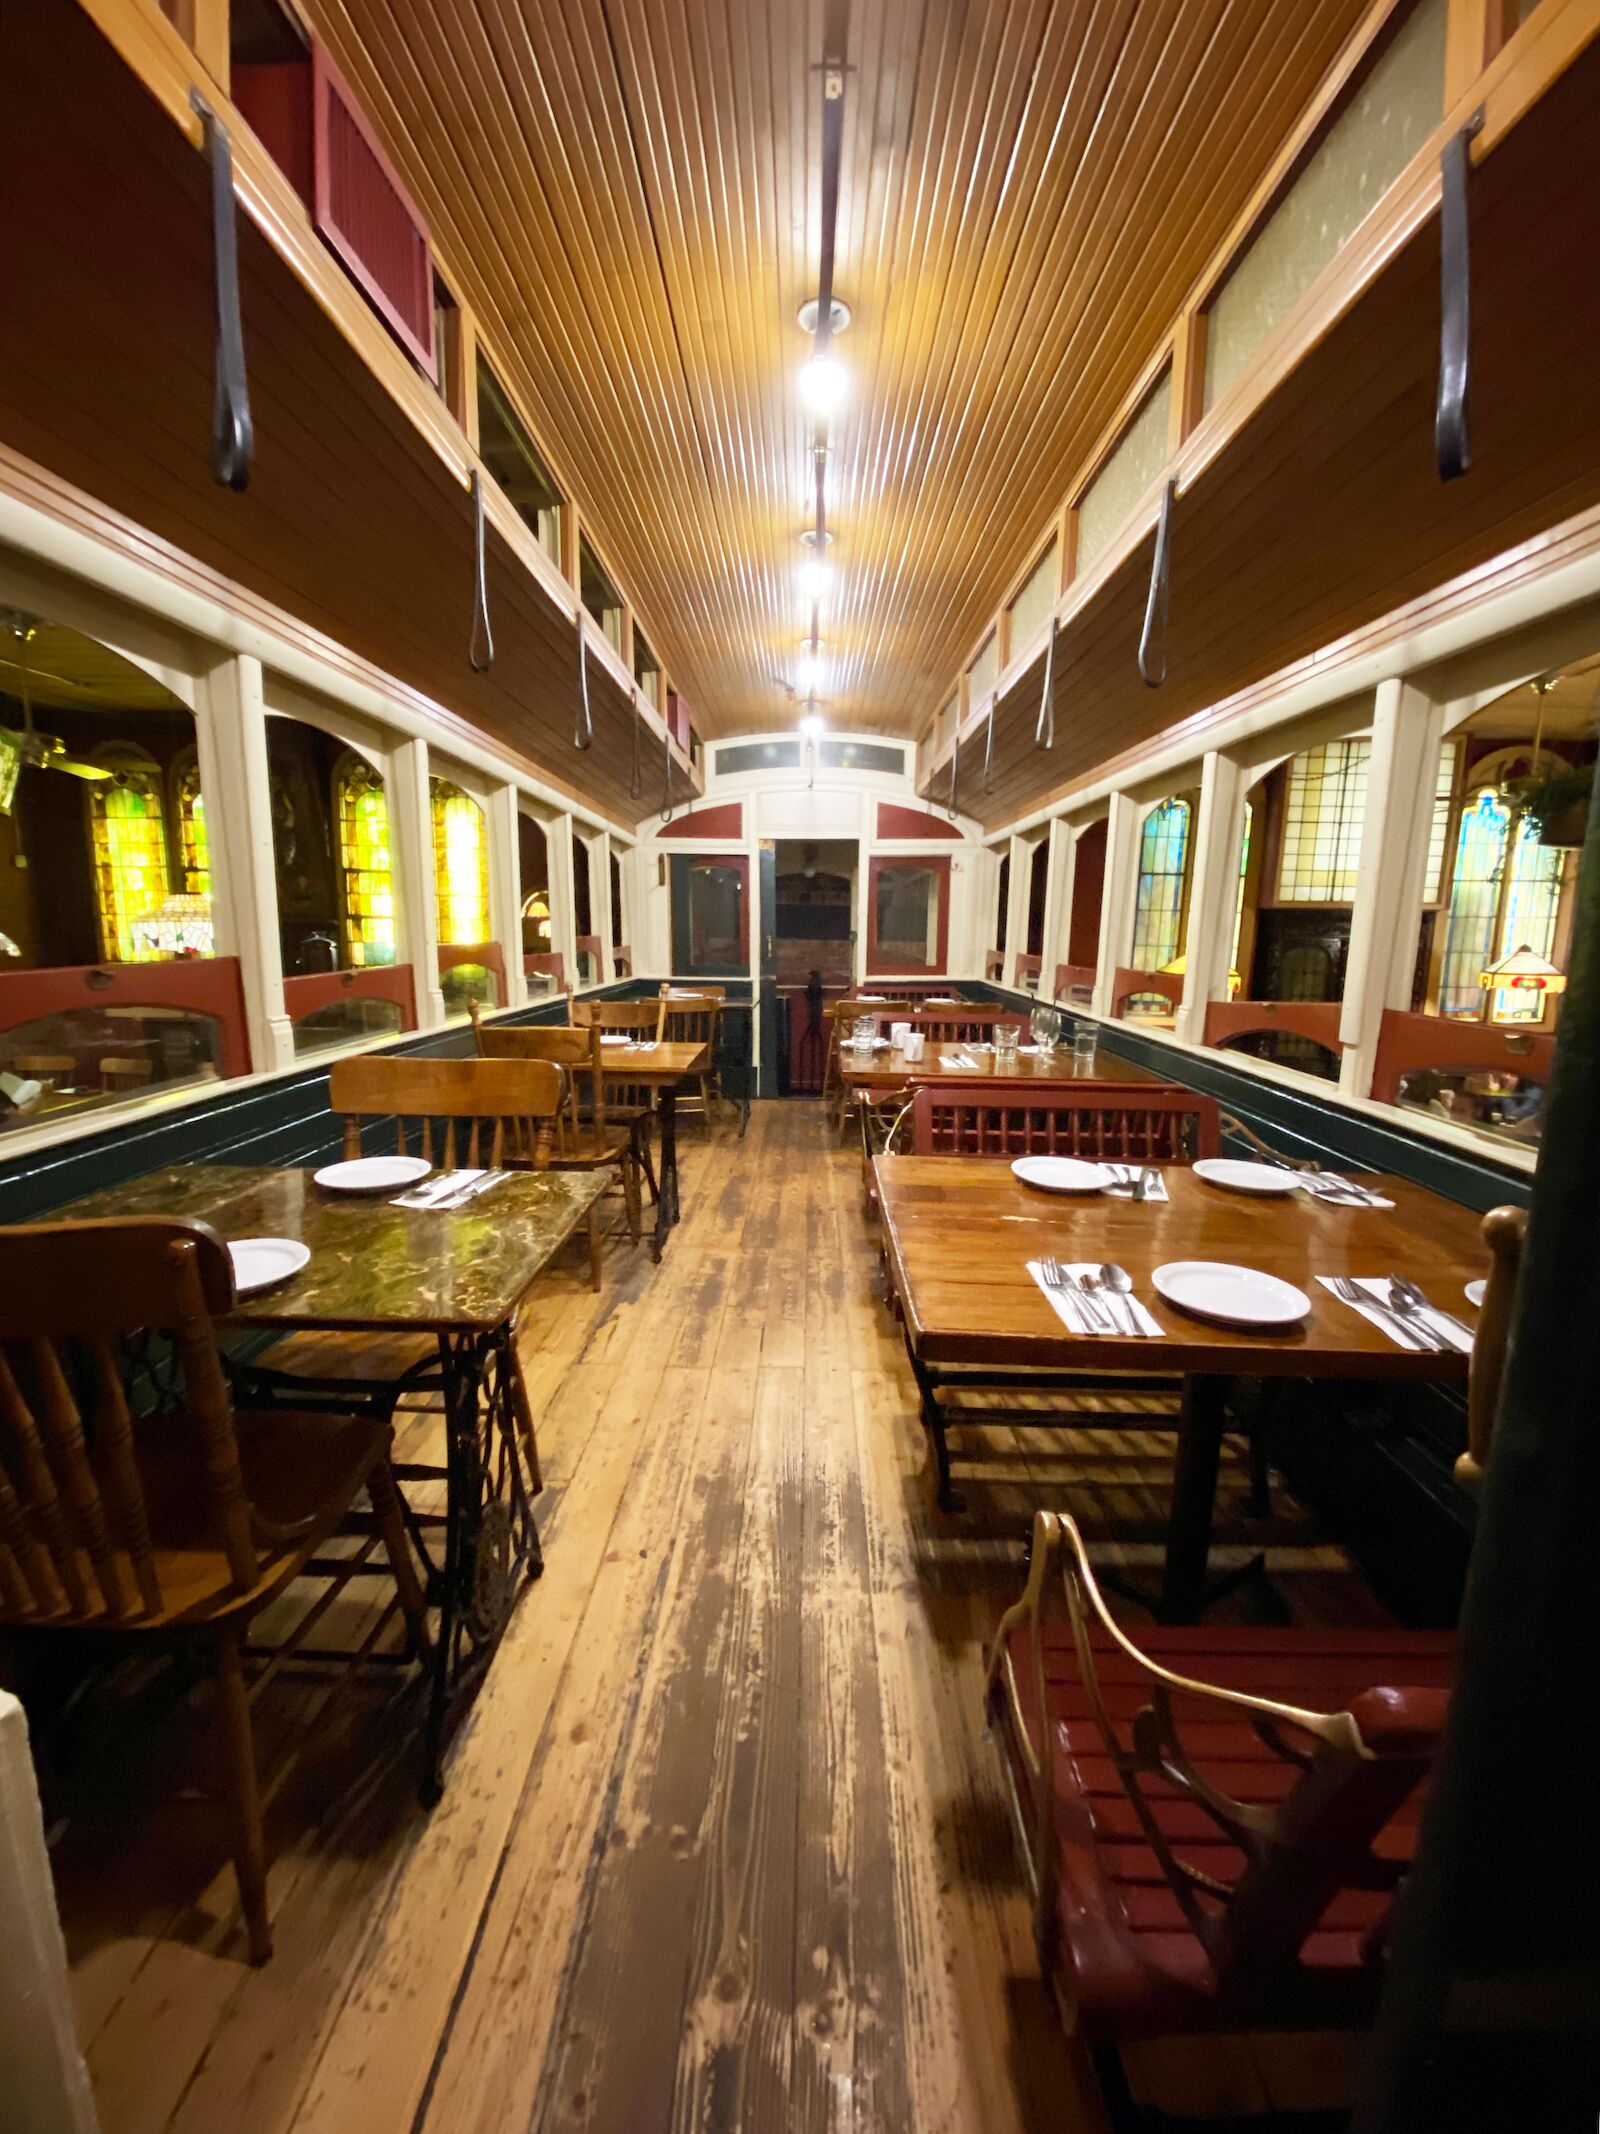 Interior of the trolley car inside the The Old Spaghetti Factory Vancouver